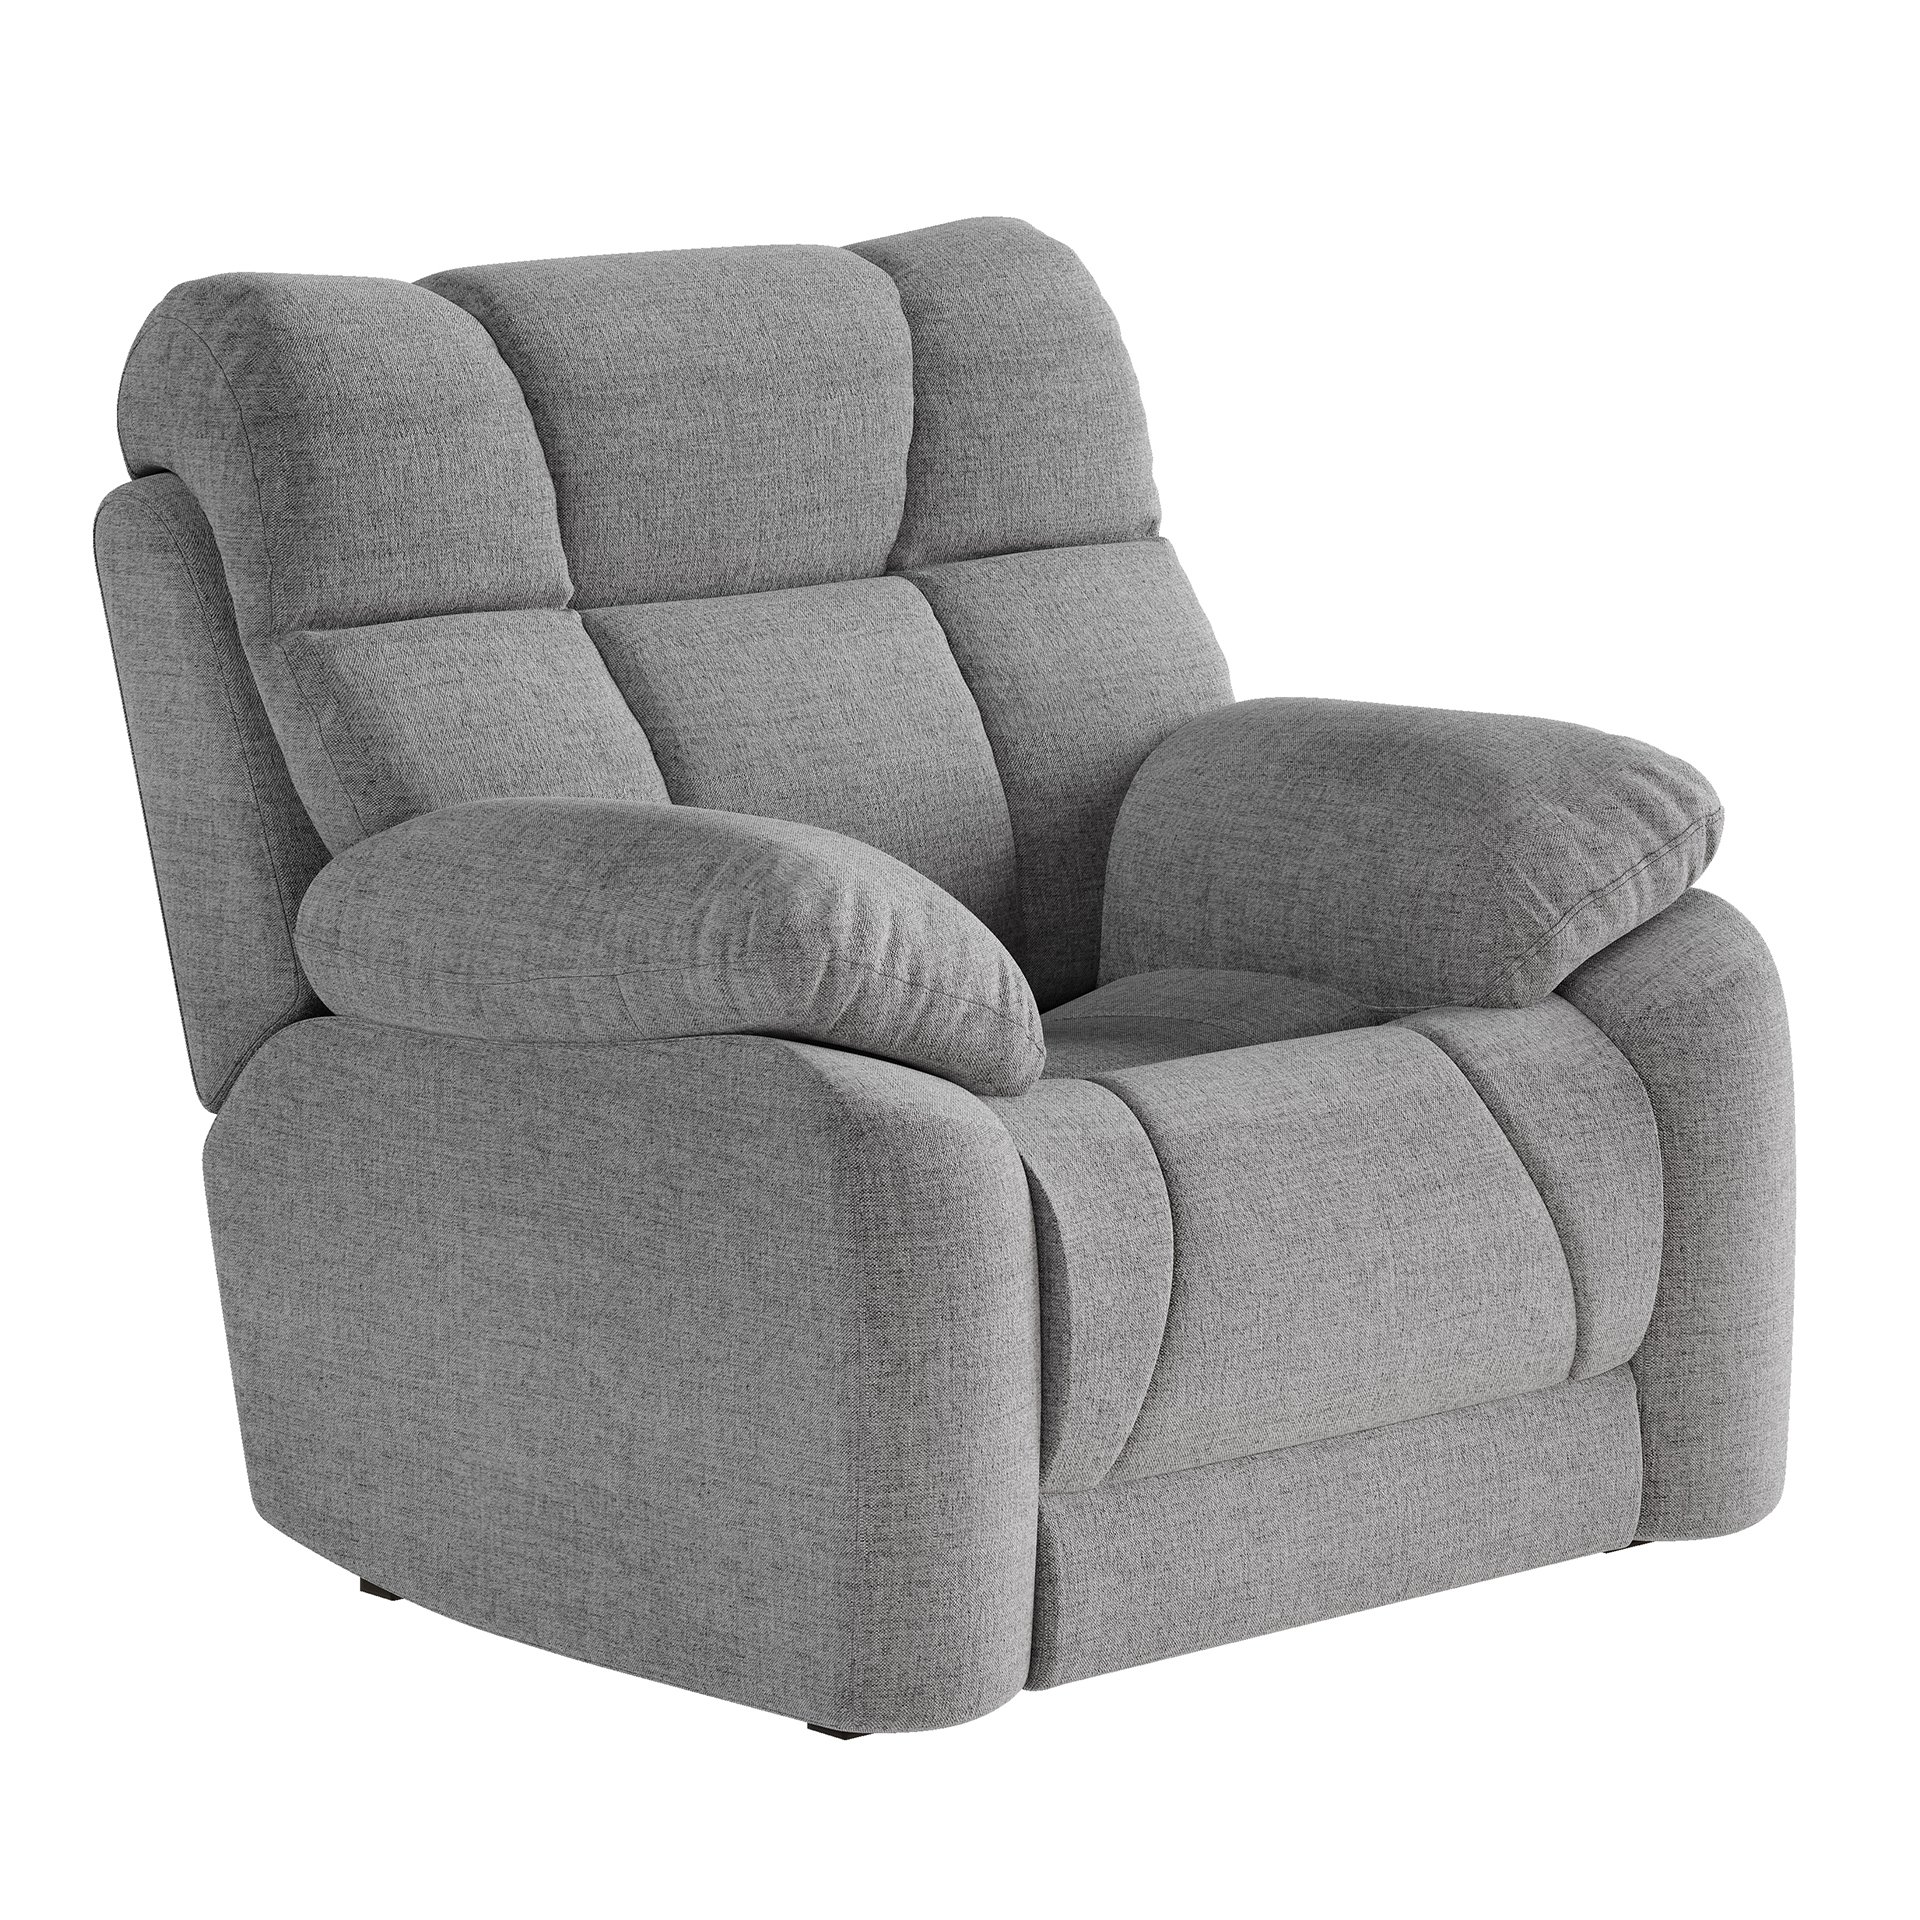 High-Quality Silo 3D Render of Gray Armchair